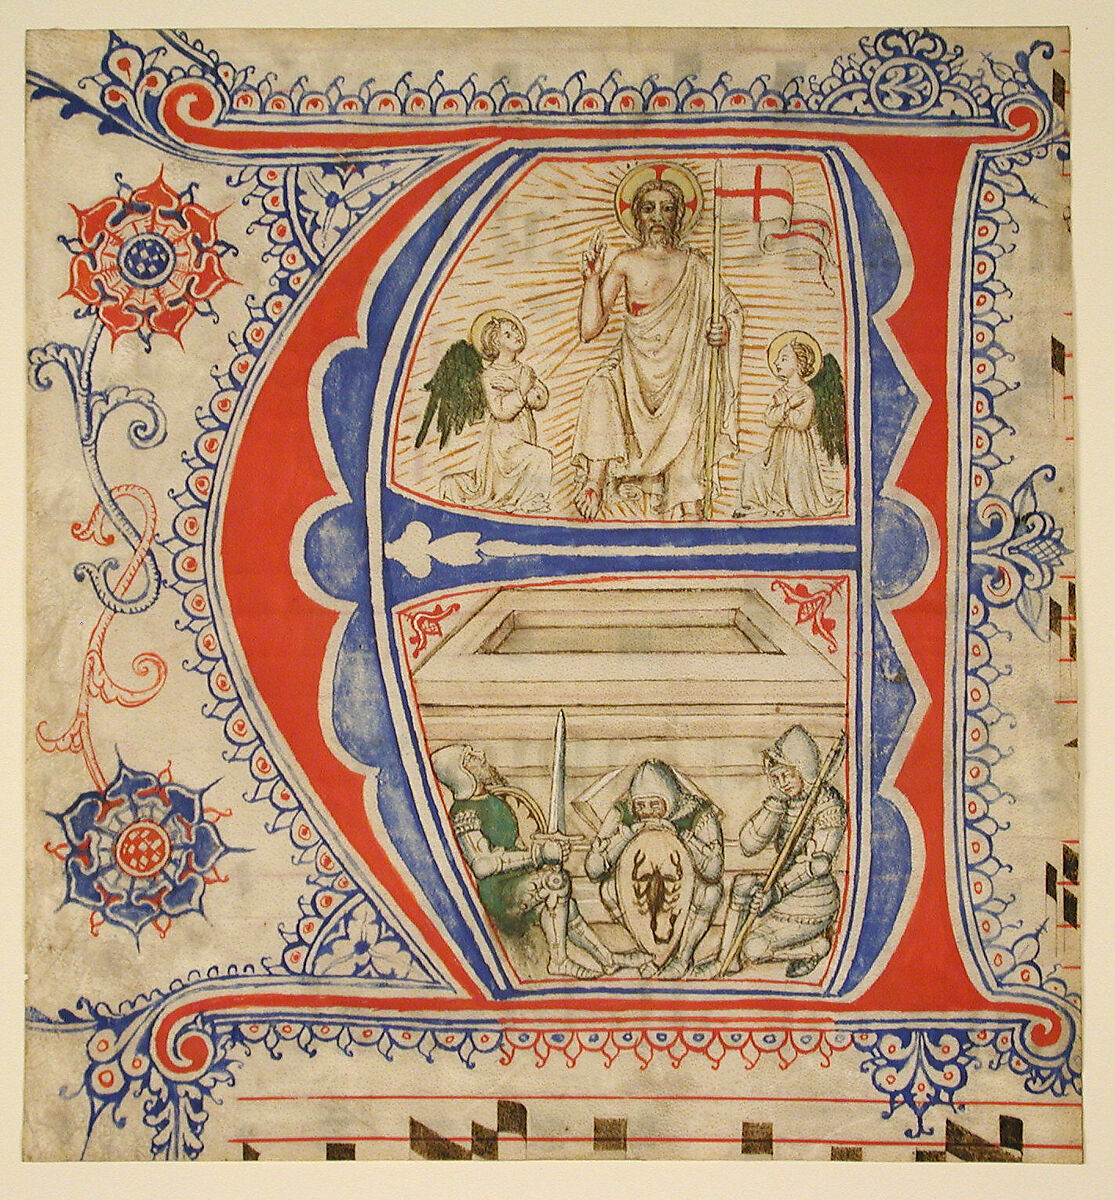 Manuscript Leaf Showing an Illuminated Initial A and The Resurrection, Parchment, tempera, ink, metal leaf, North Italian 